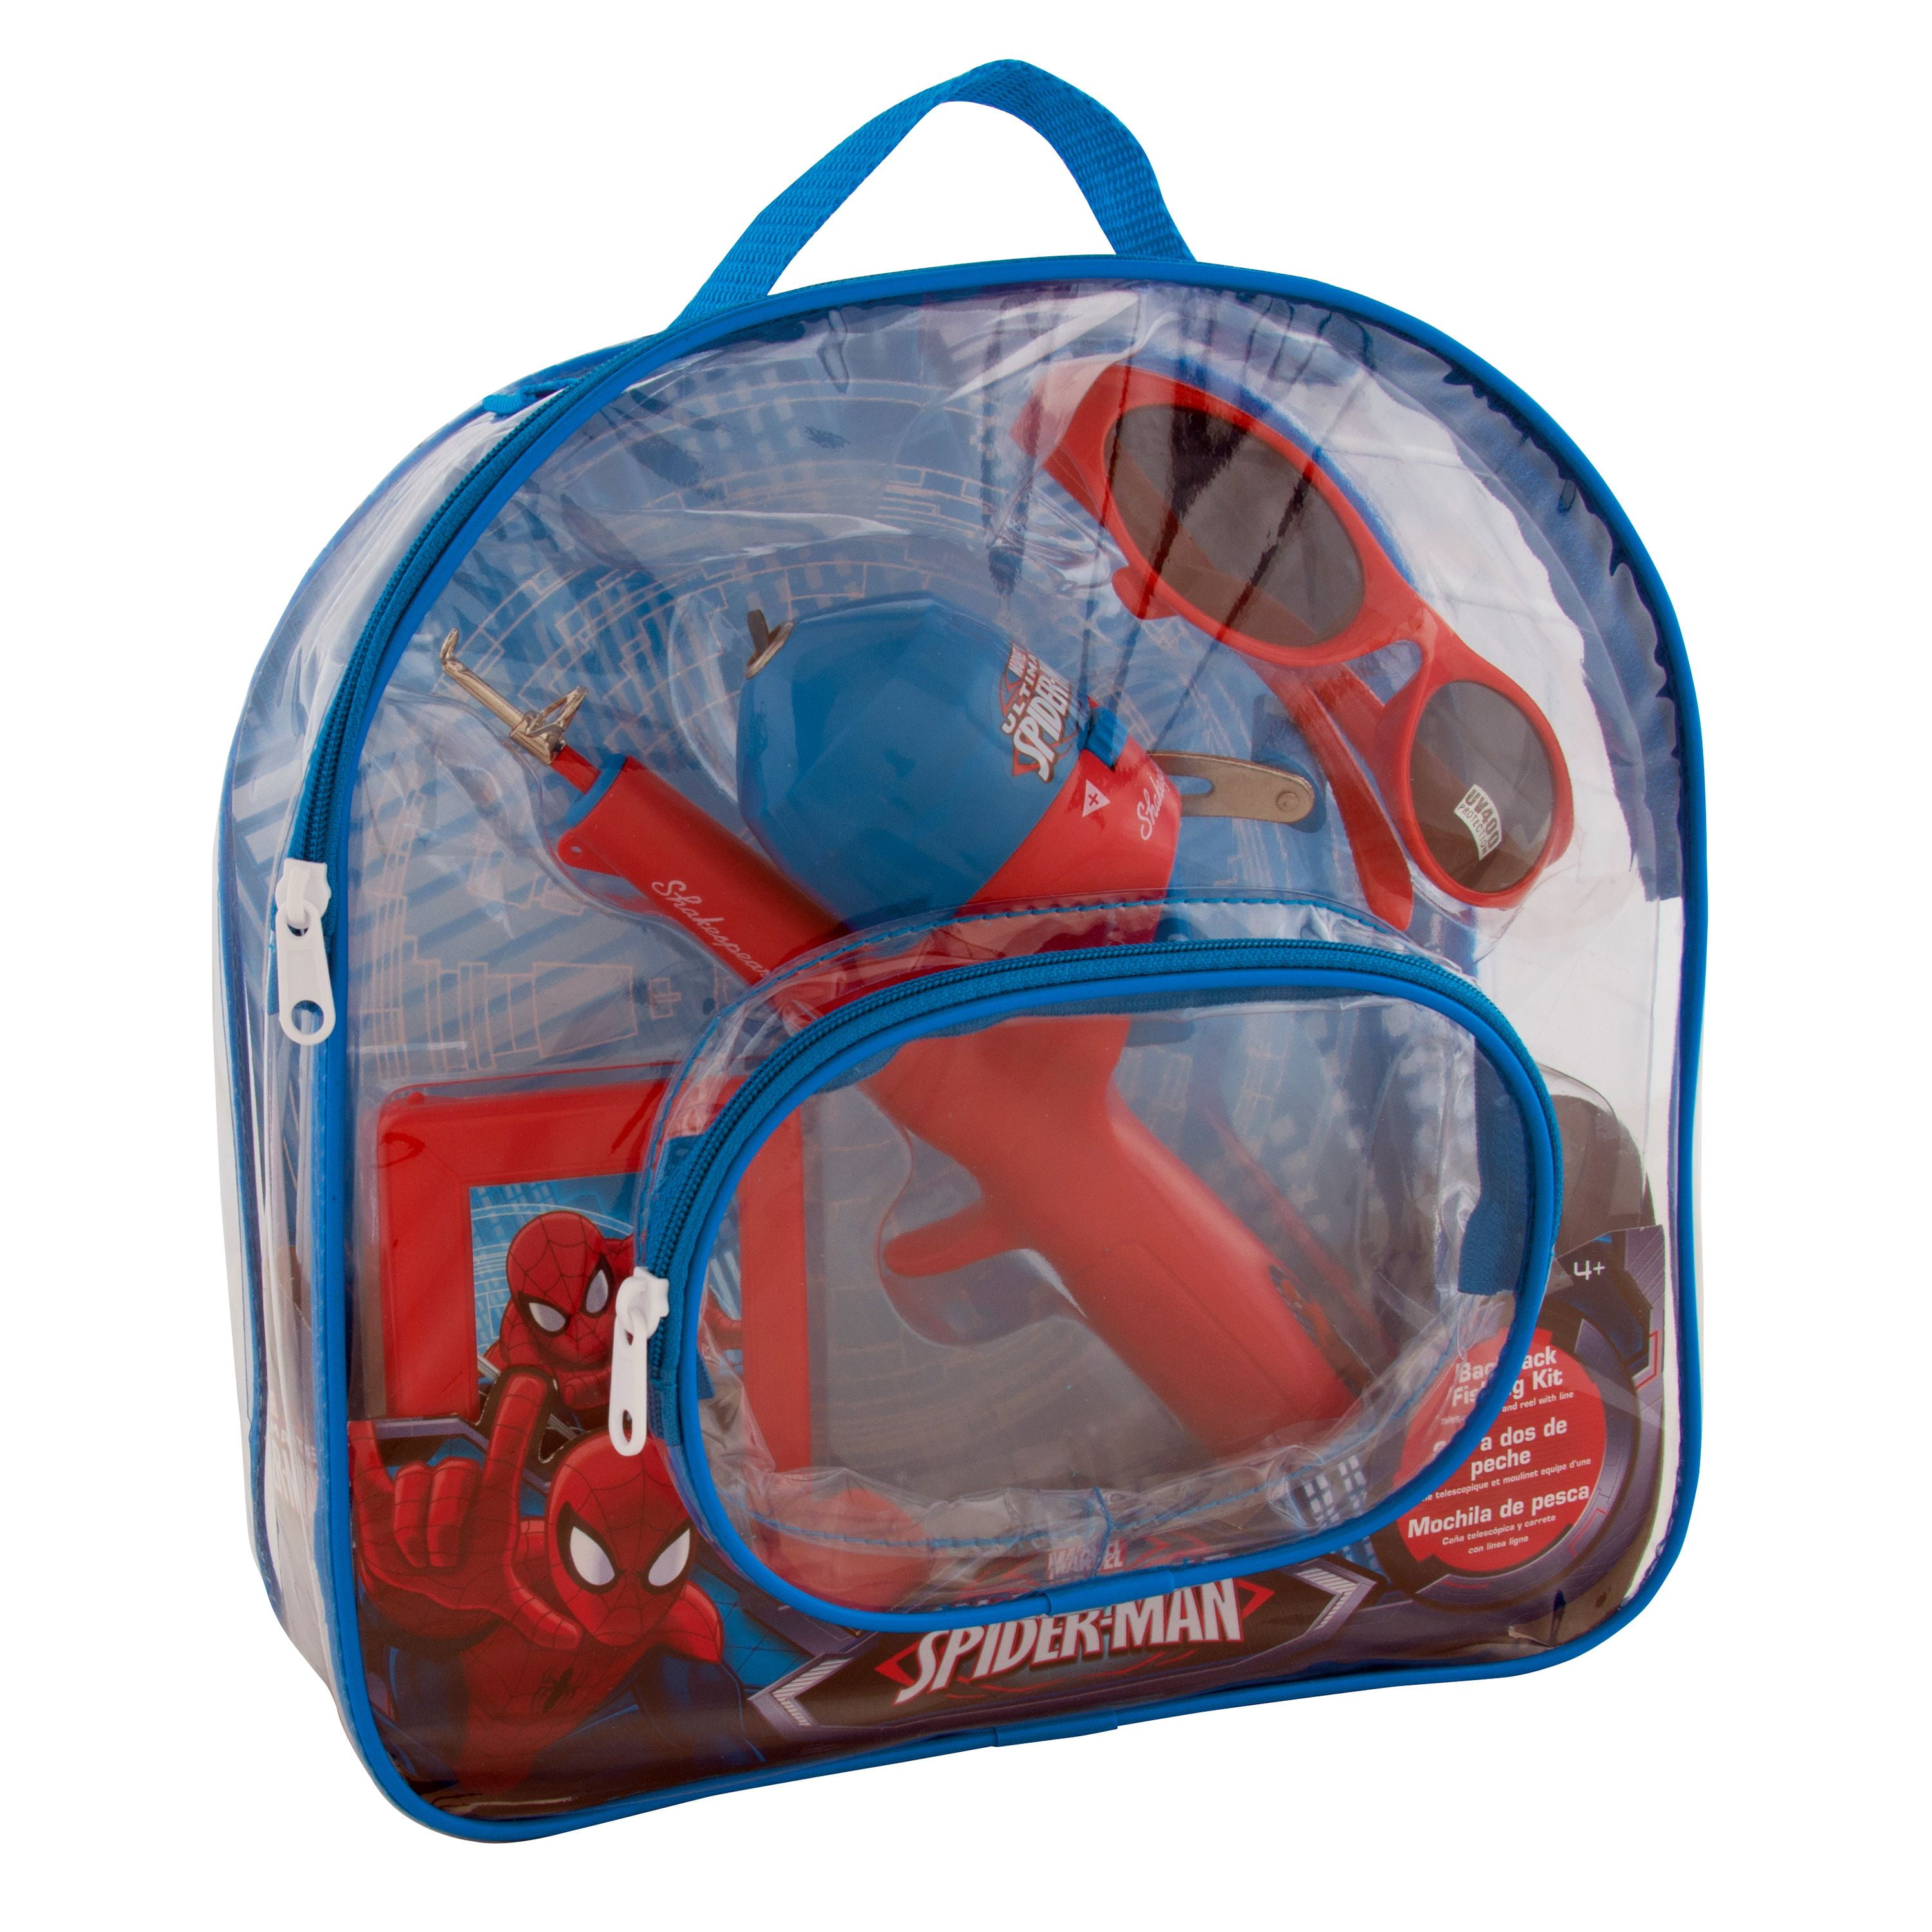 Shakespeare Youth Fishing Kits Spiderman, Backpack